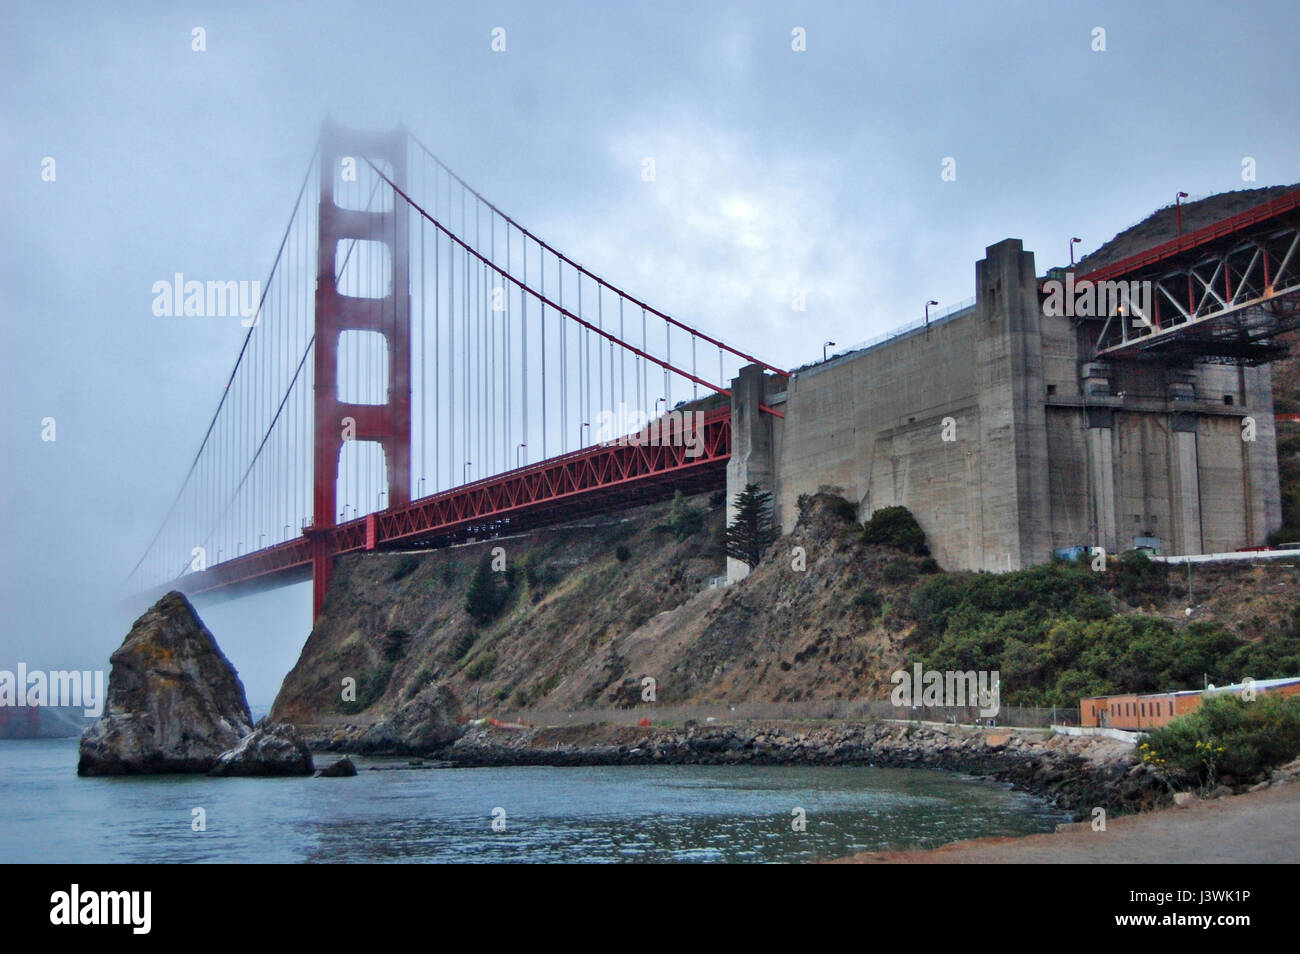 Image of the famous Golden Gate bridge in a very foggy day in San Francisco, California, USA. August 2013. Stock Photo